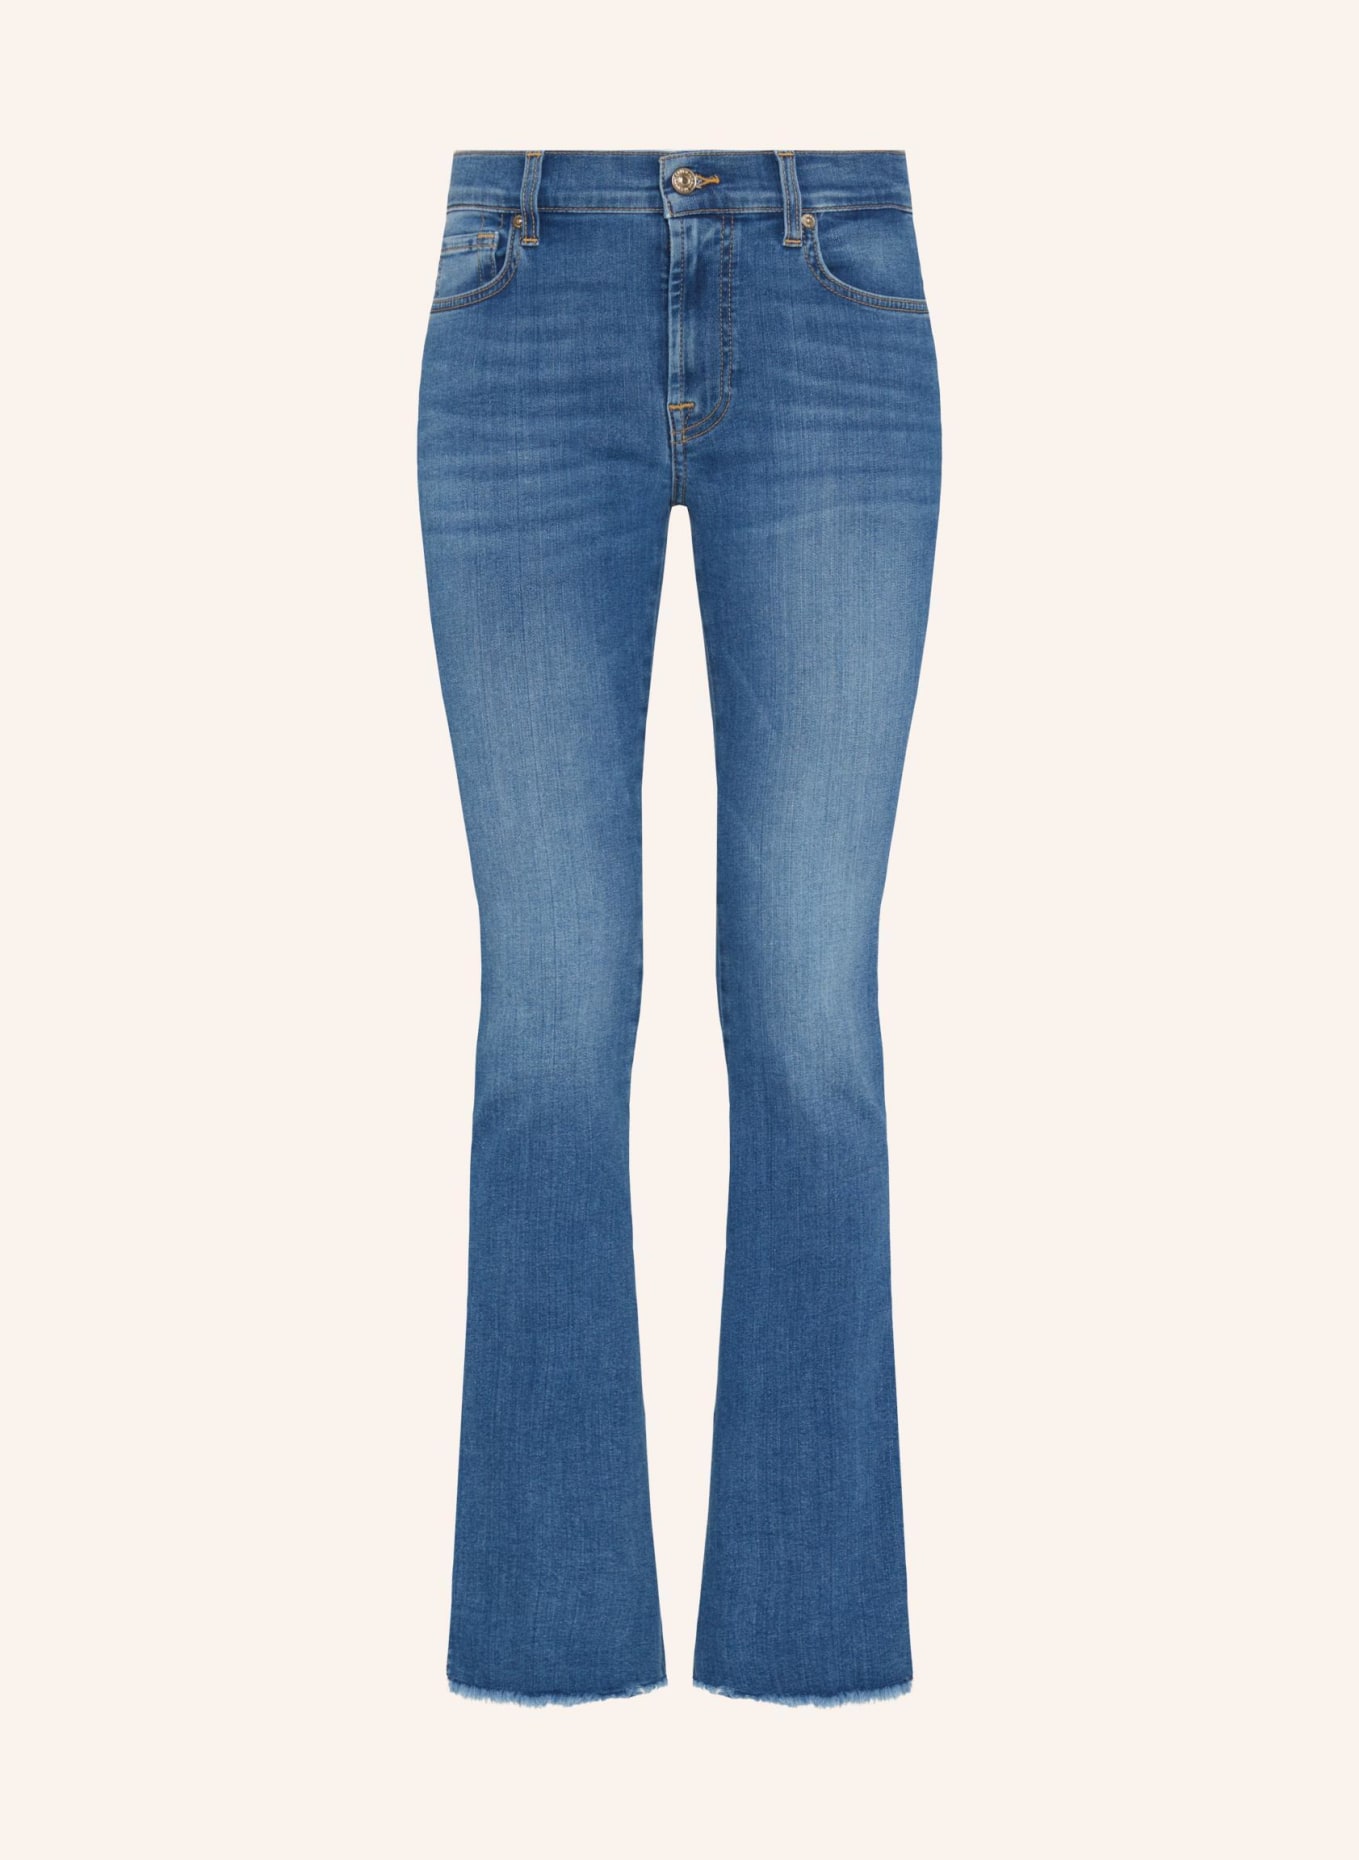 7 for all mankind Jeans BOOTCUT TAILORLESS Bootcut Fit, Farbe: BLAU (Bild 1)